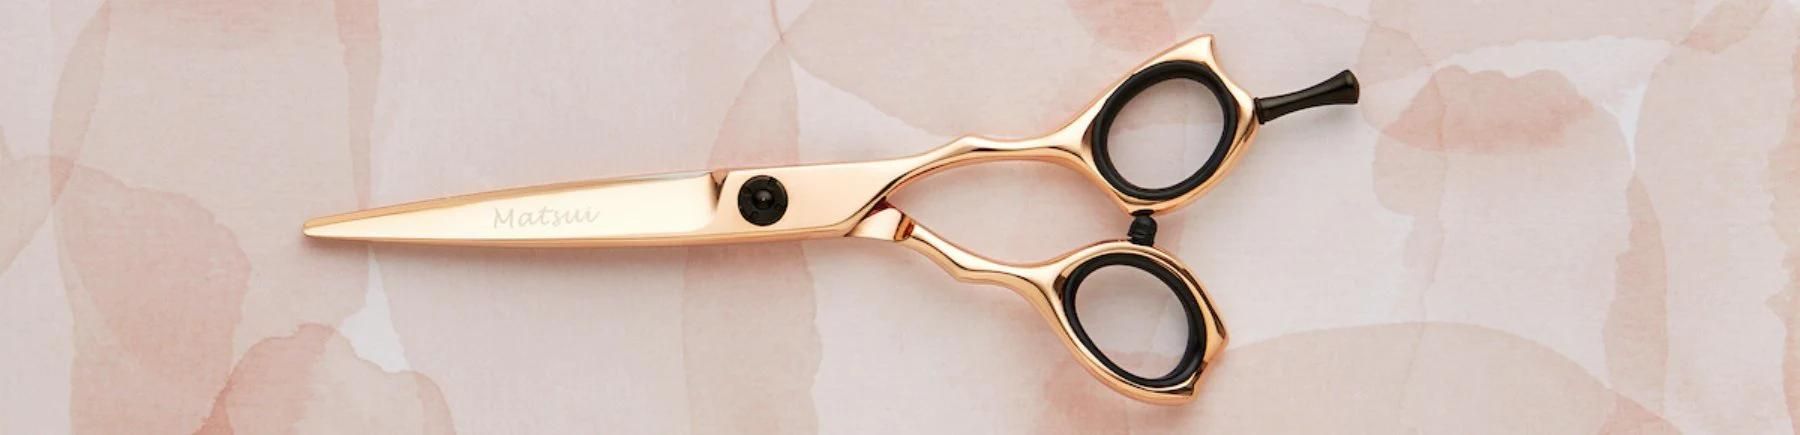 What Other Accessories Are Needed When Purchasing Hairdressing Scissors